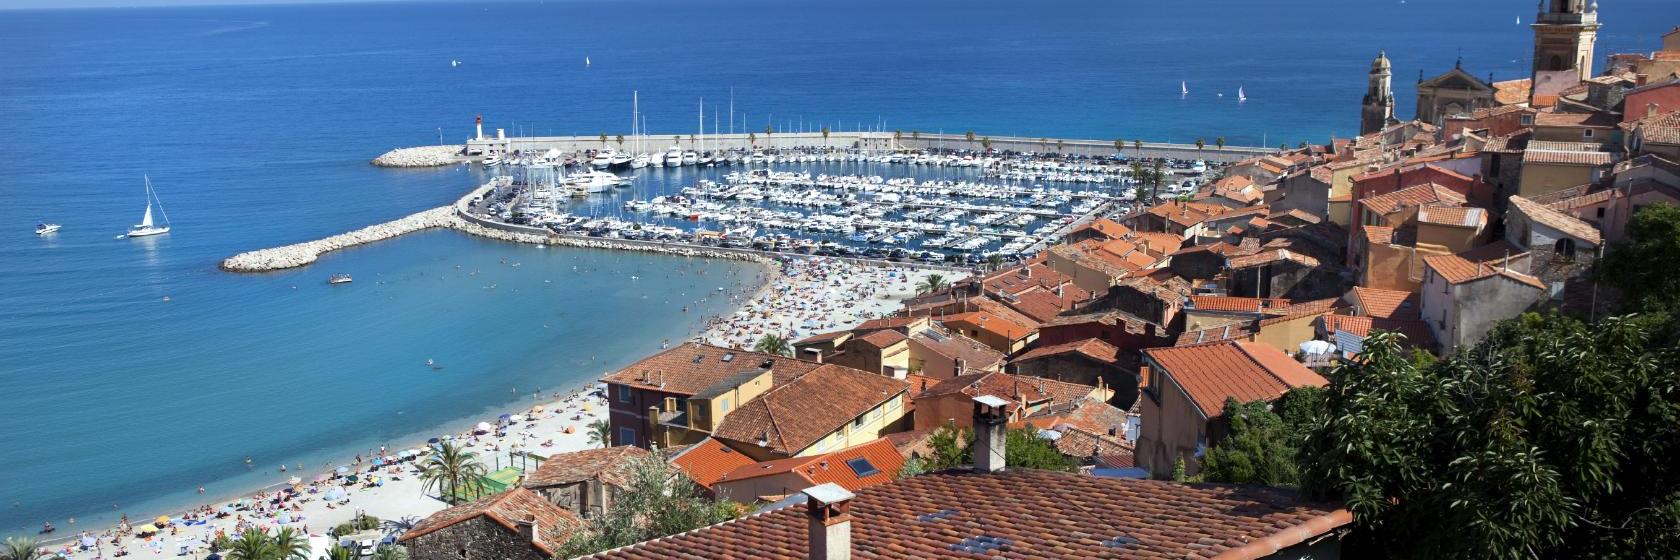 10 Best Menton Hotels, France (From $66)